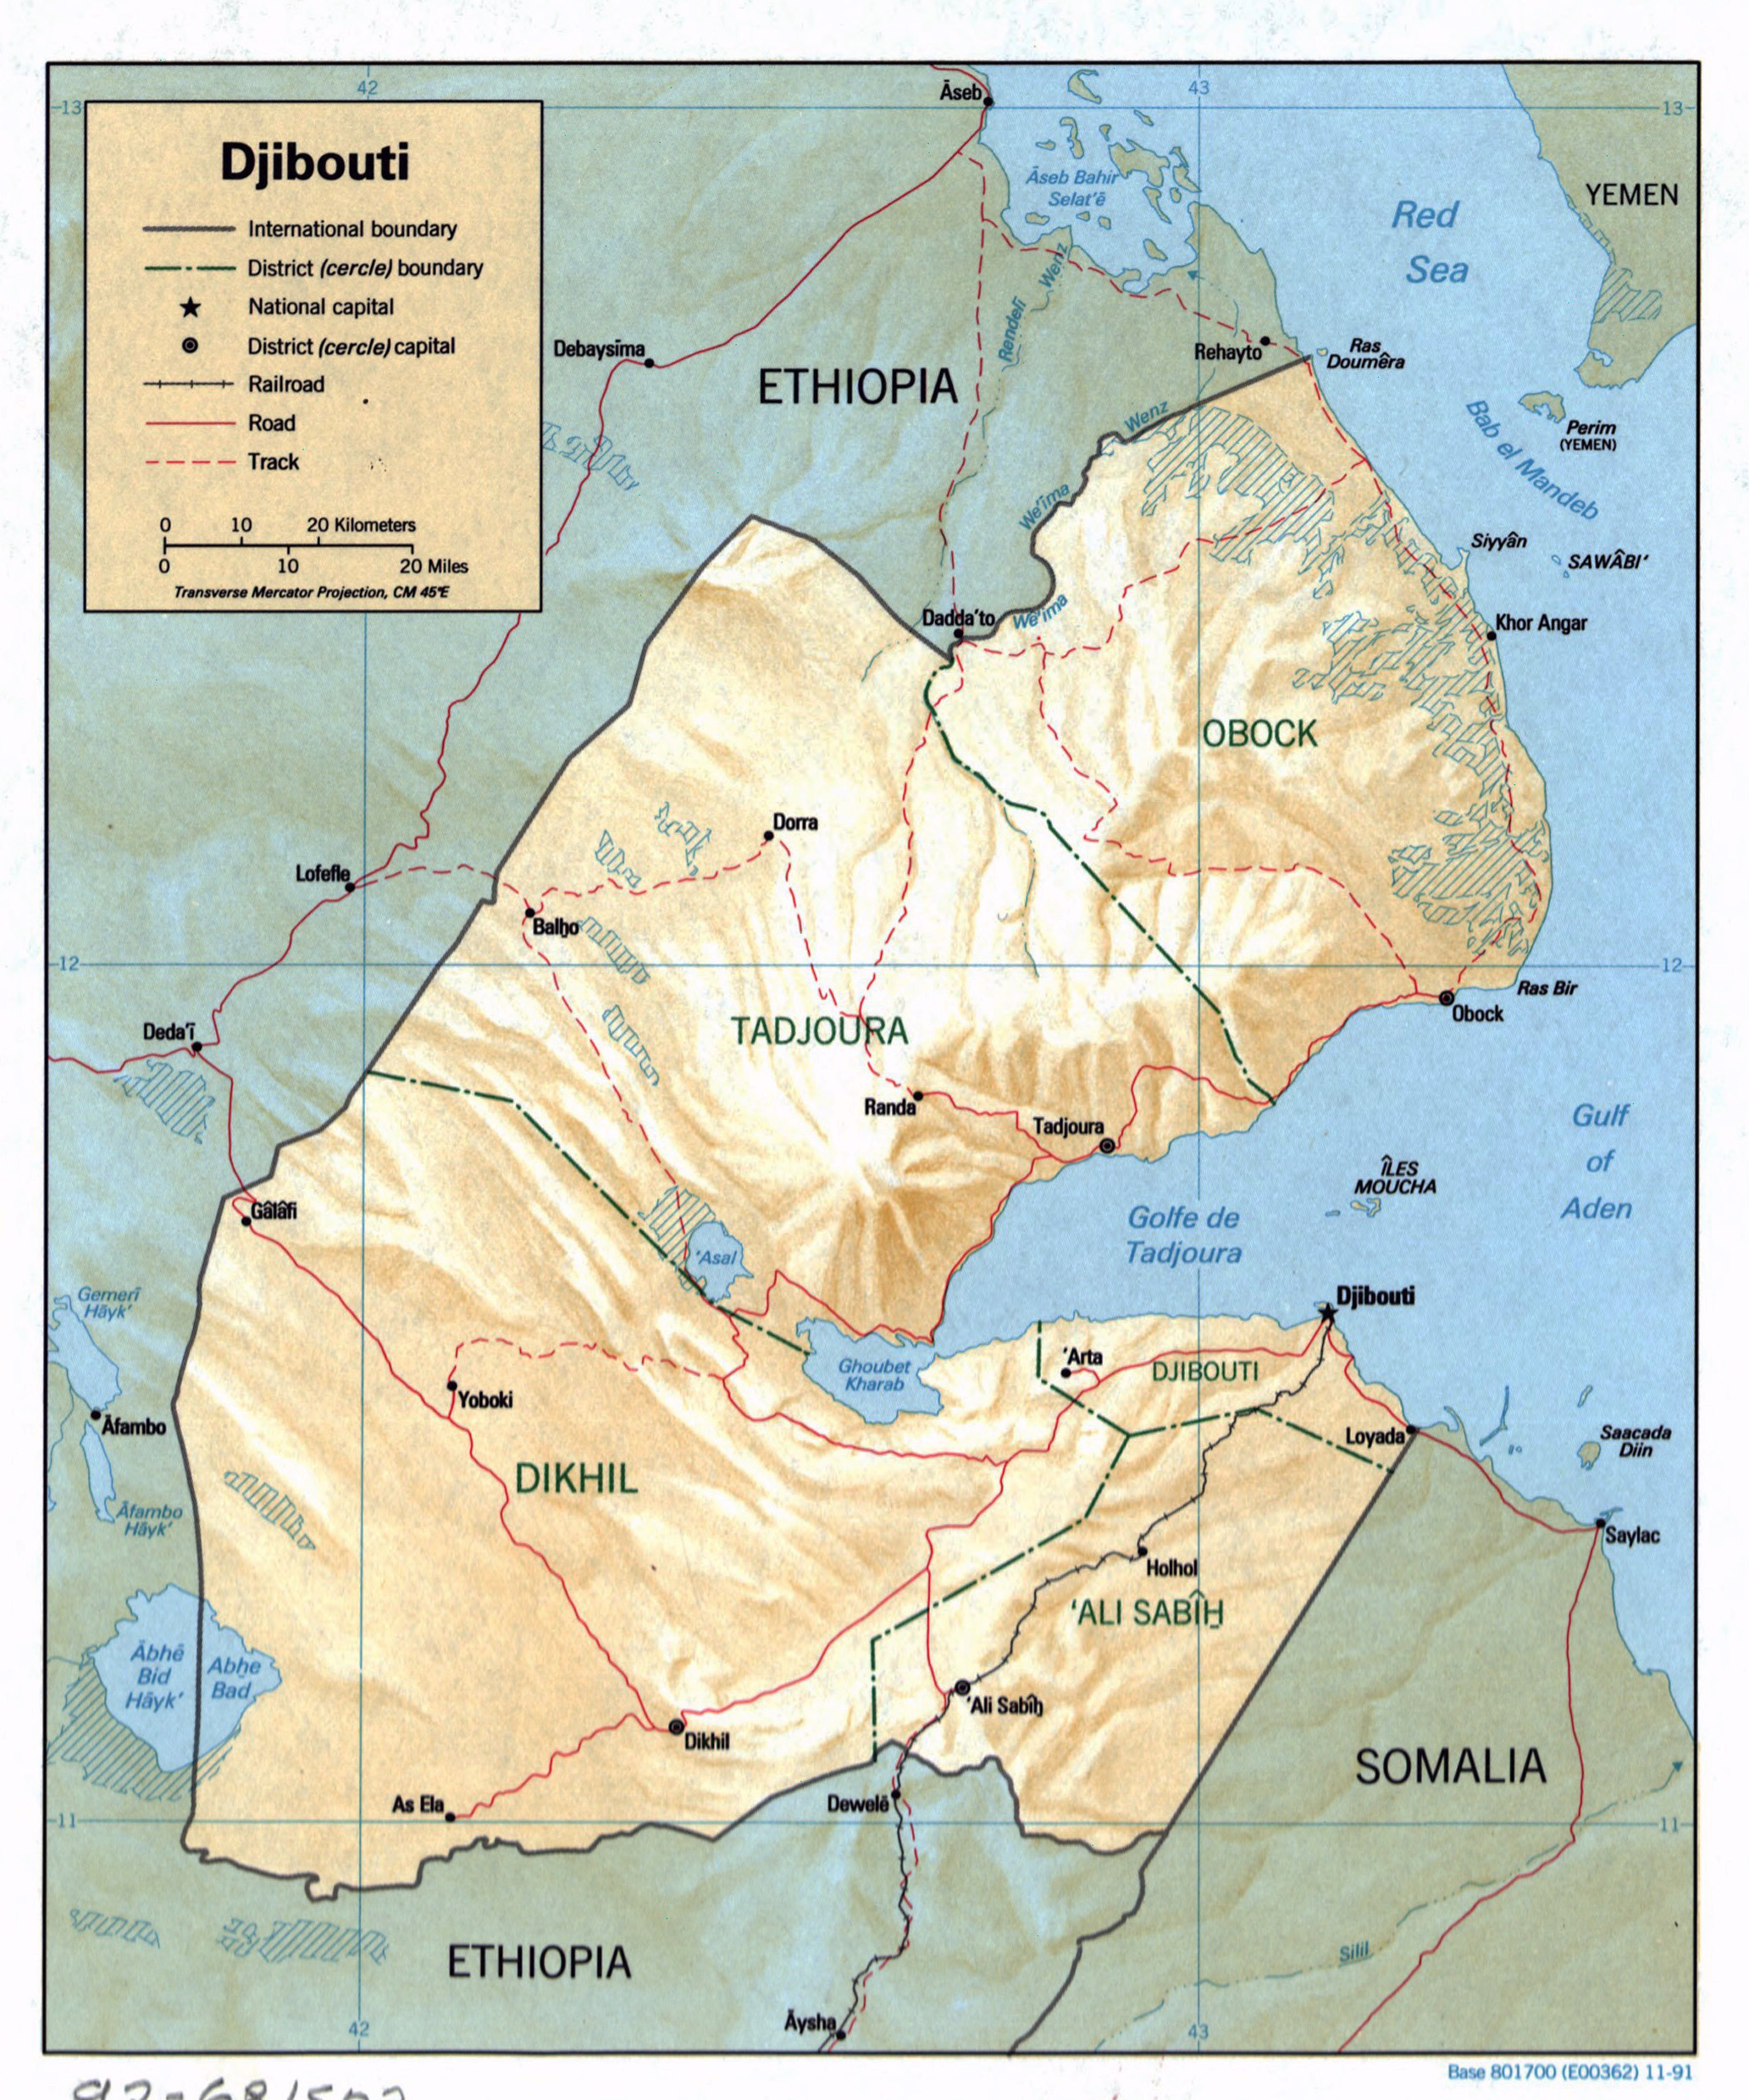 Large Detailed Political And Administrative Map Of Djibouti With Relief Roads Railroads And Major Cities 1991 